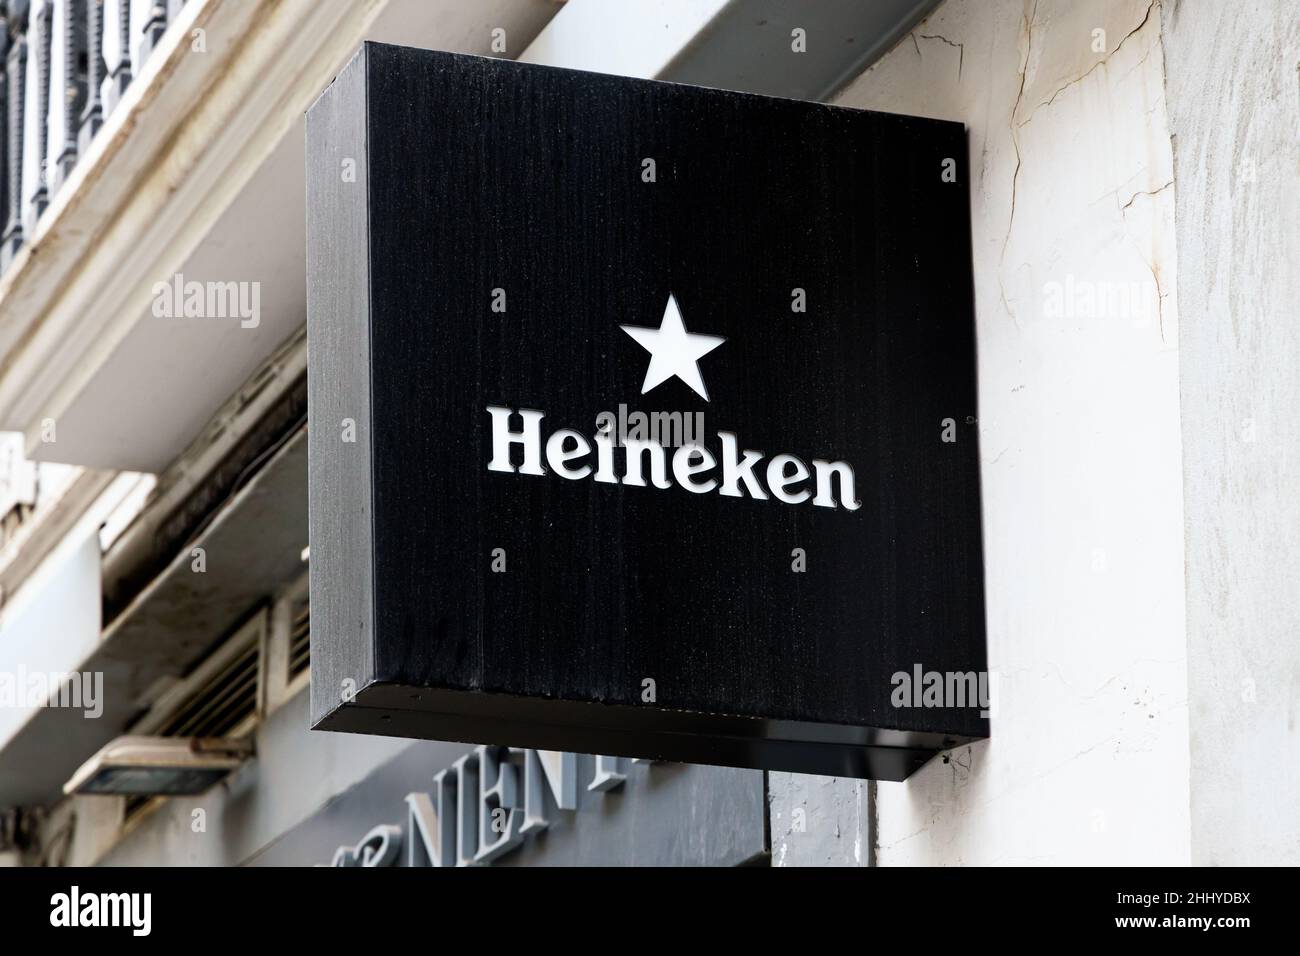 VALENCIA, SPAIN - JANUARY 24, 2022: Heineken is a Dutch multinational brewing company founded in 1864 Stock Photo